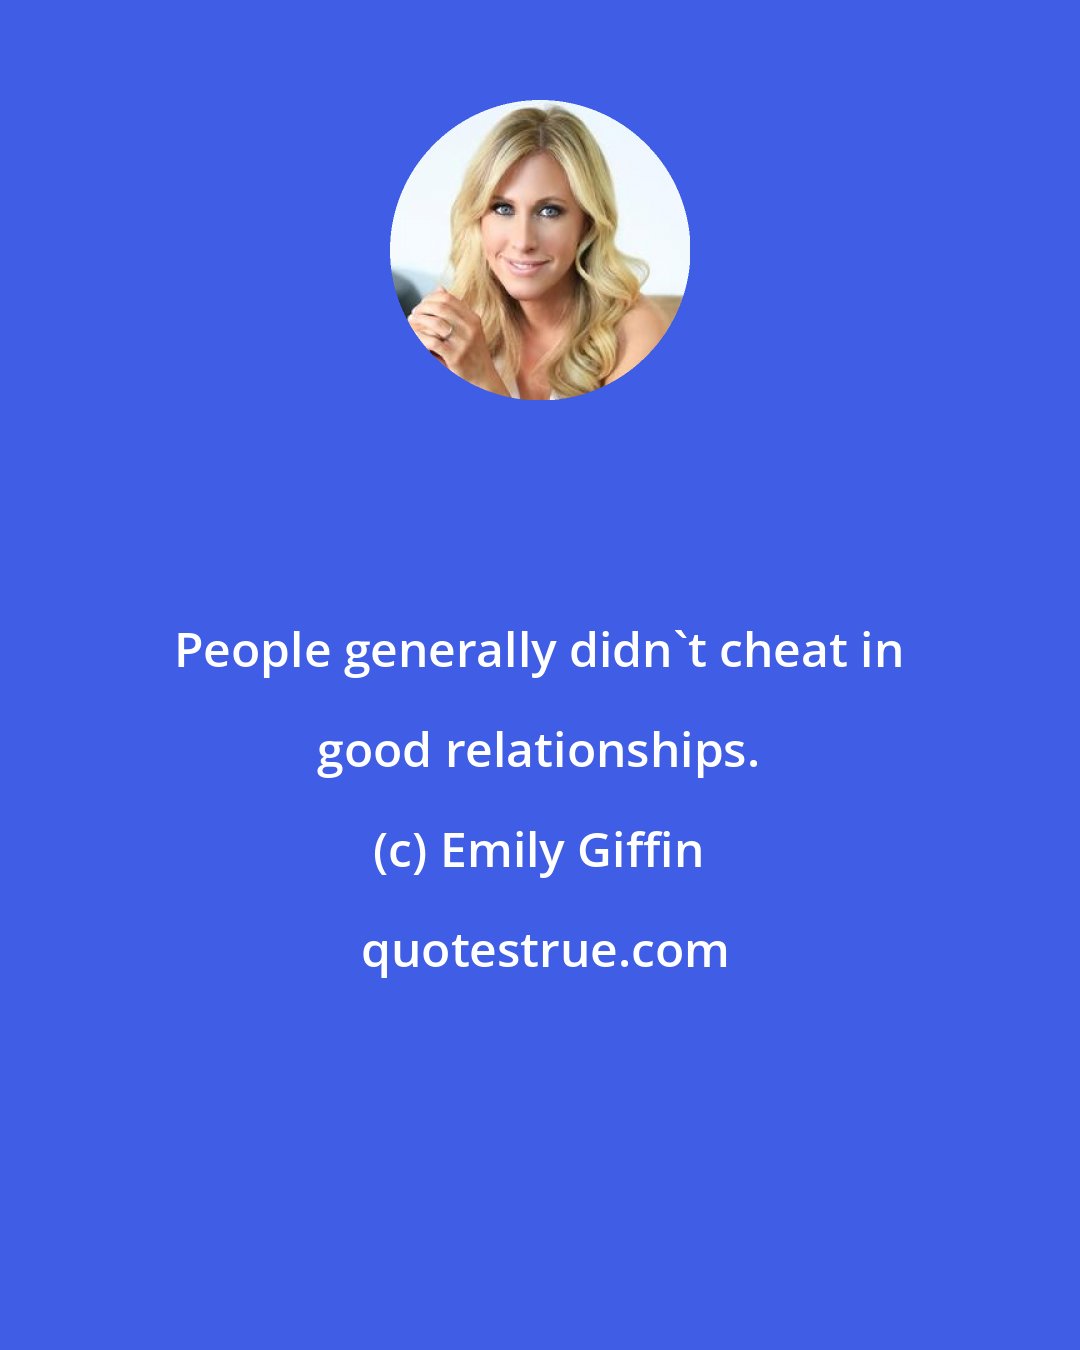 Emily Giffin: People generally didn't cheat in good relationships.